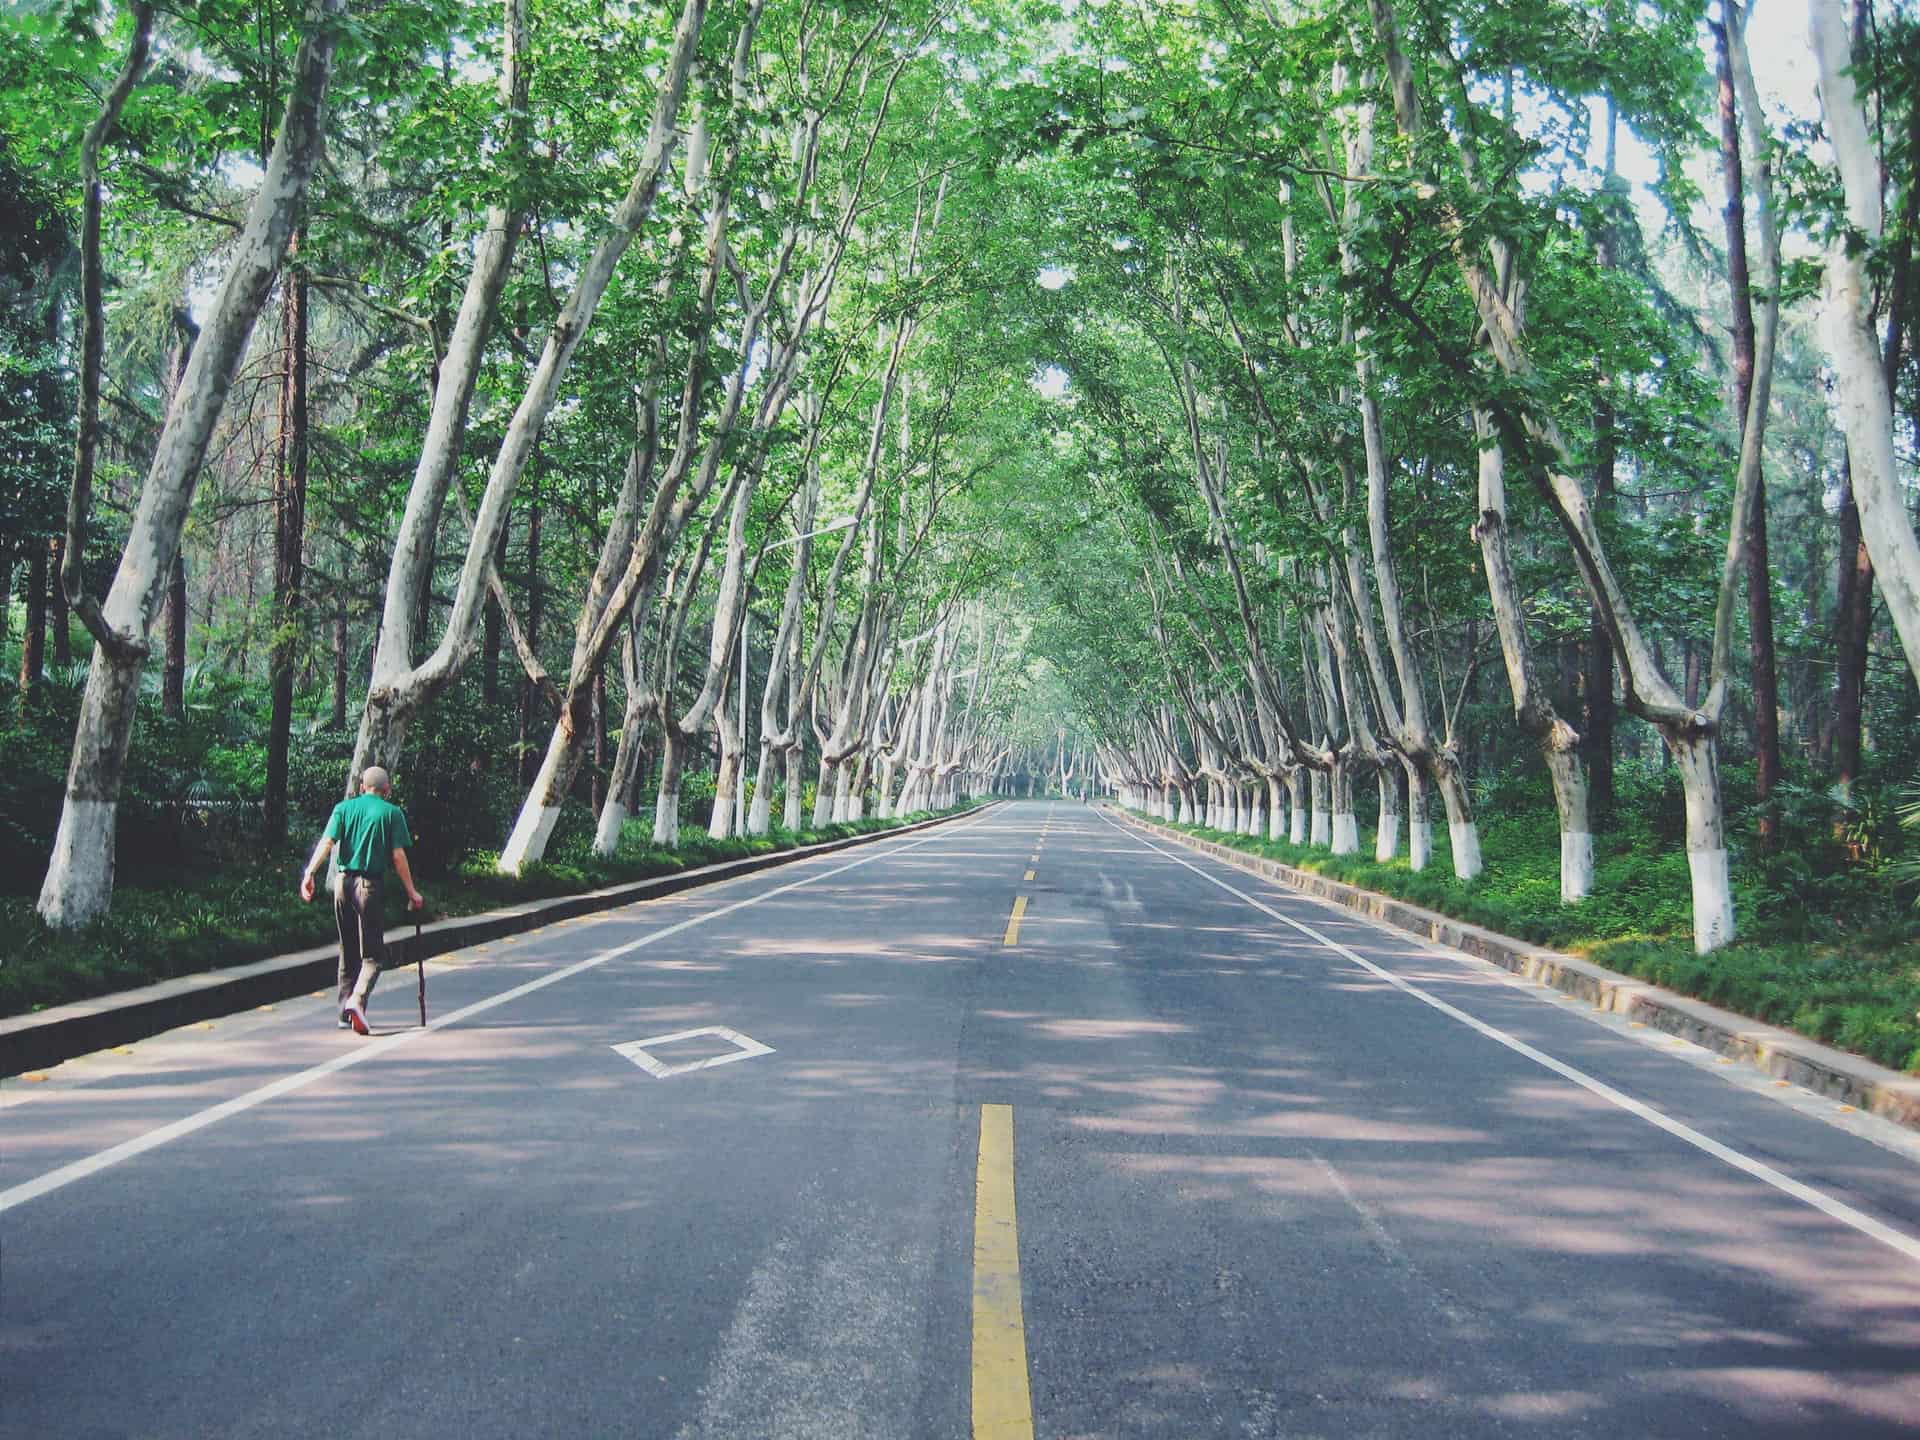 An elderly man using a cane to walk down a long road with trees growing on each side of the road.